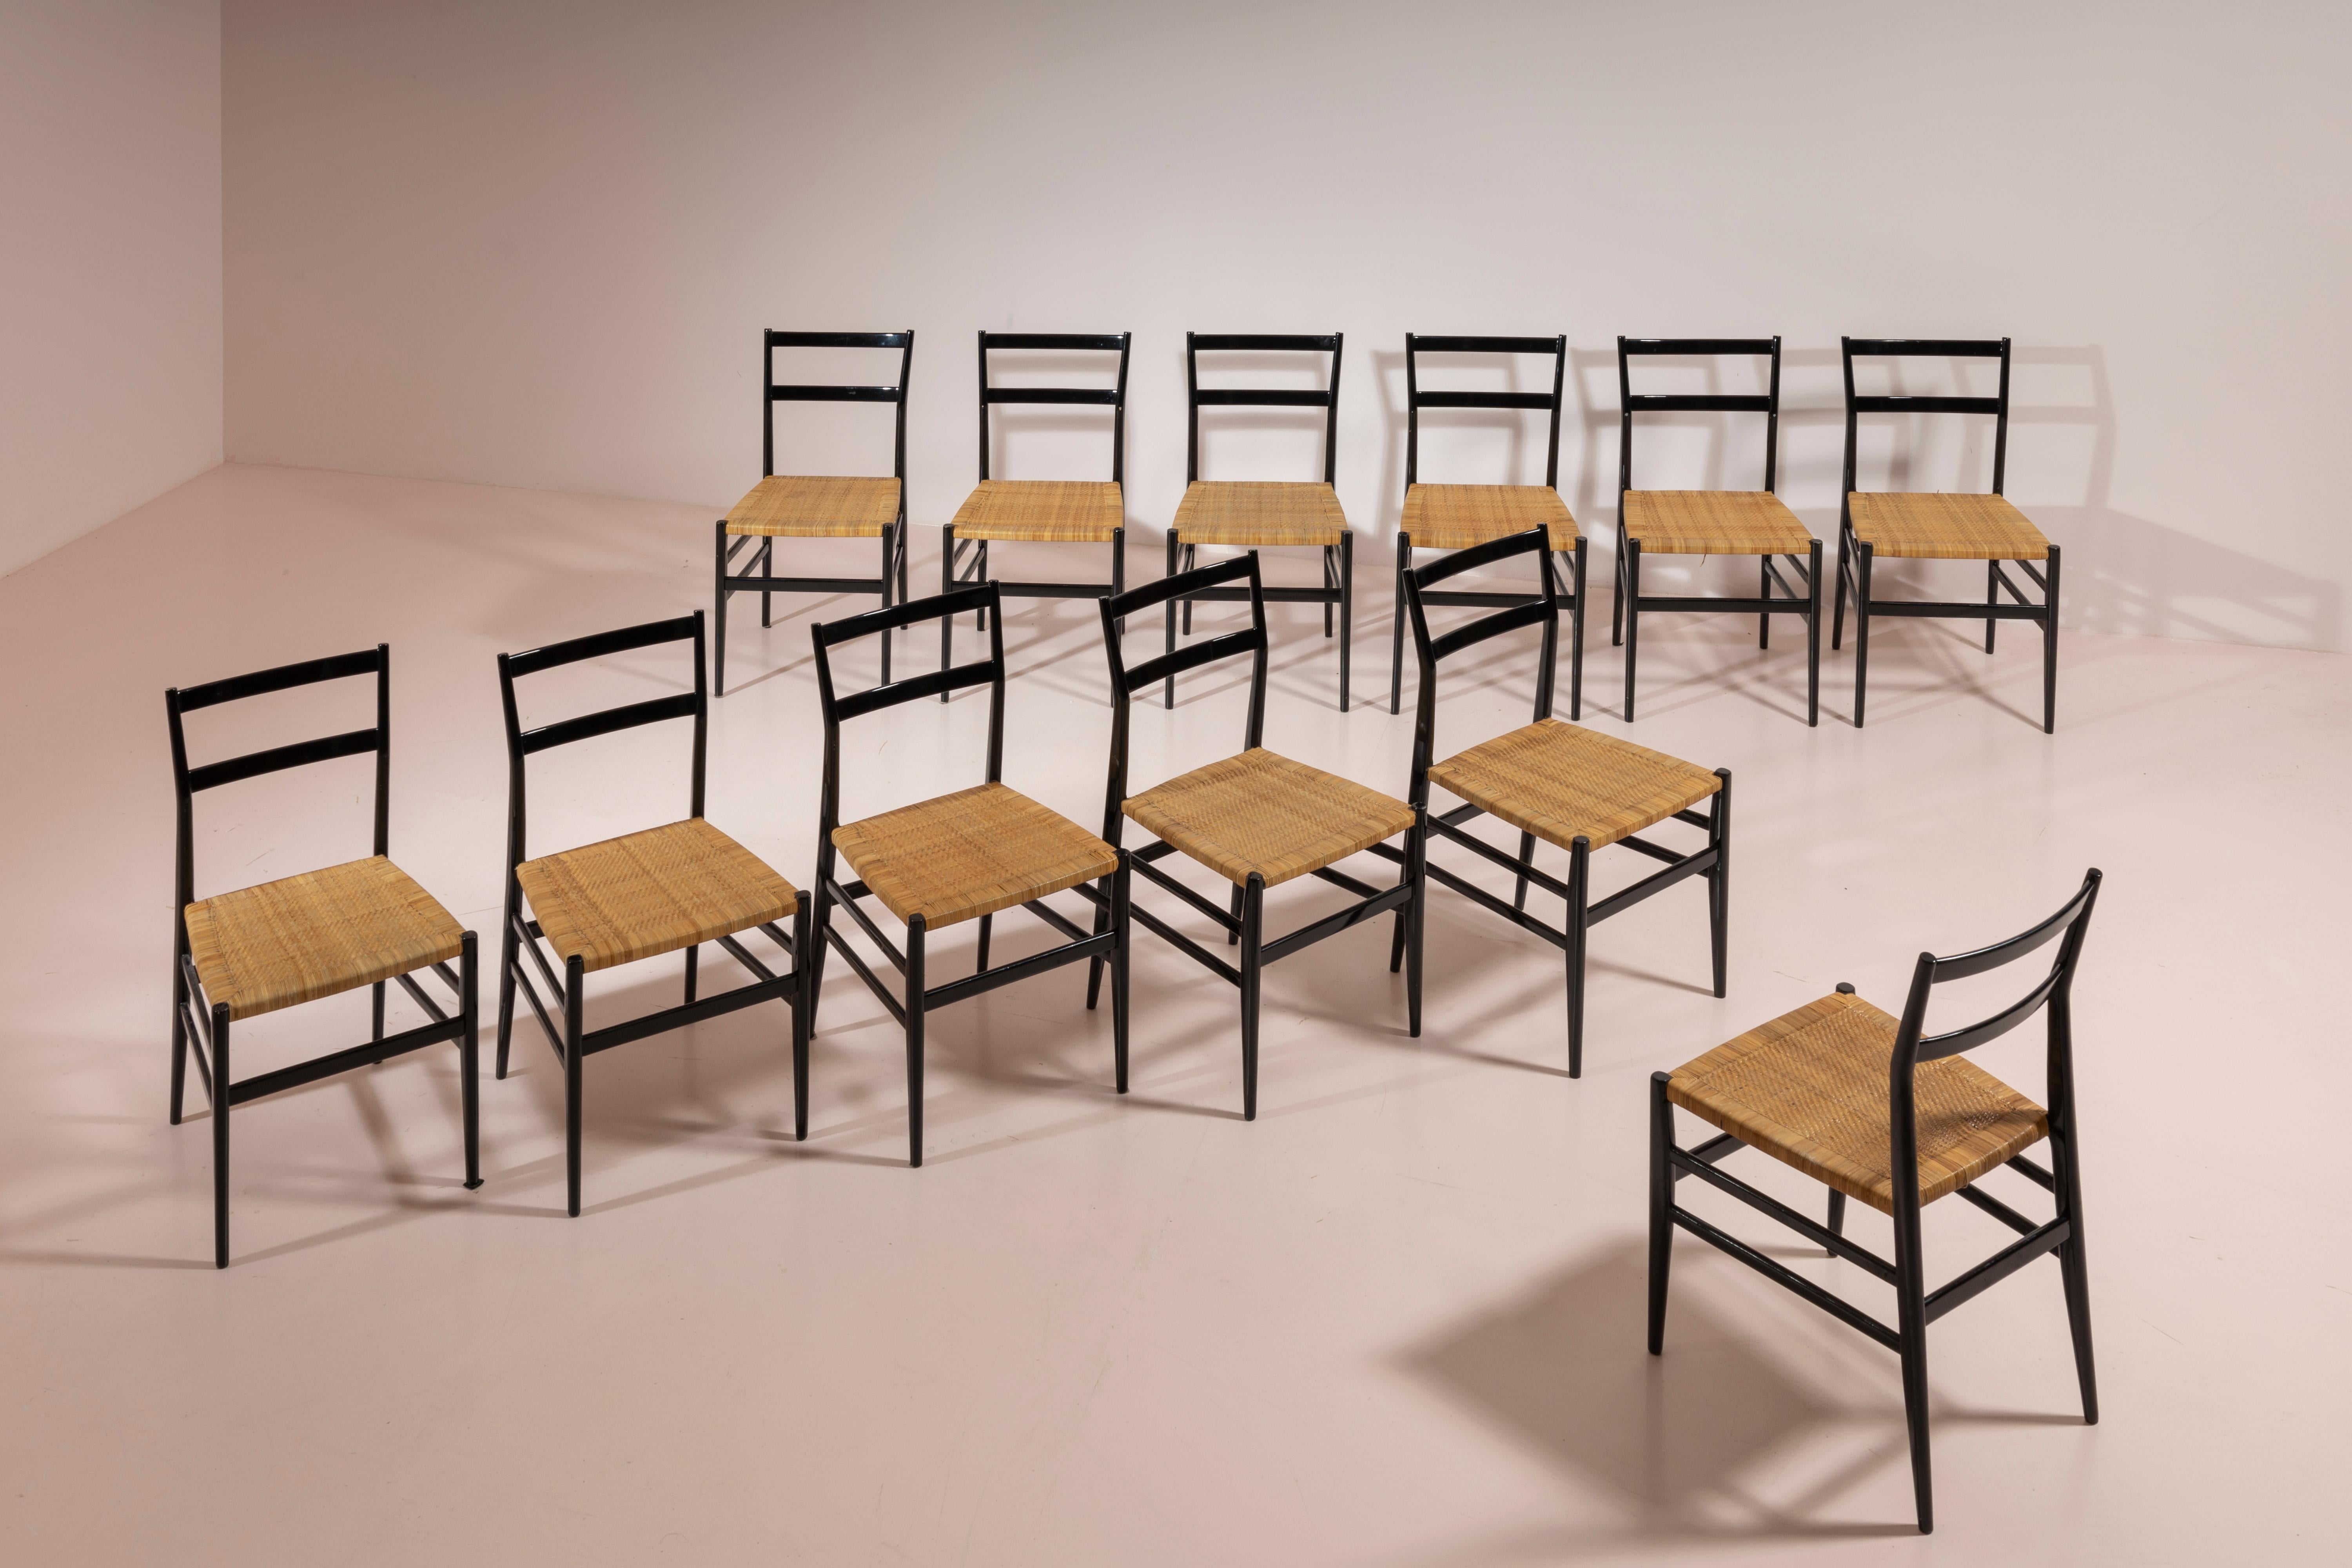 Set of 12 black-stained ash wood chairs with hand-woven rattan cane, designed by Gio Ponti, model 646 Leggera, in 1951 and manufactured by Figli di Amedeo Cassina during the late 1950s.

The chair, designed by Gio Ponti in 1951, is instantly